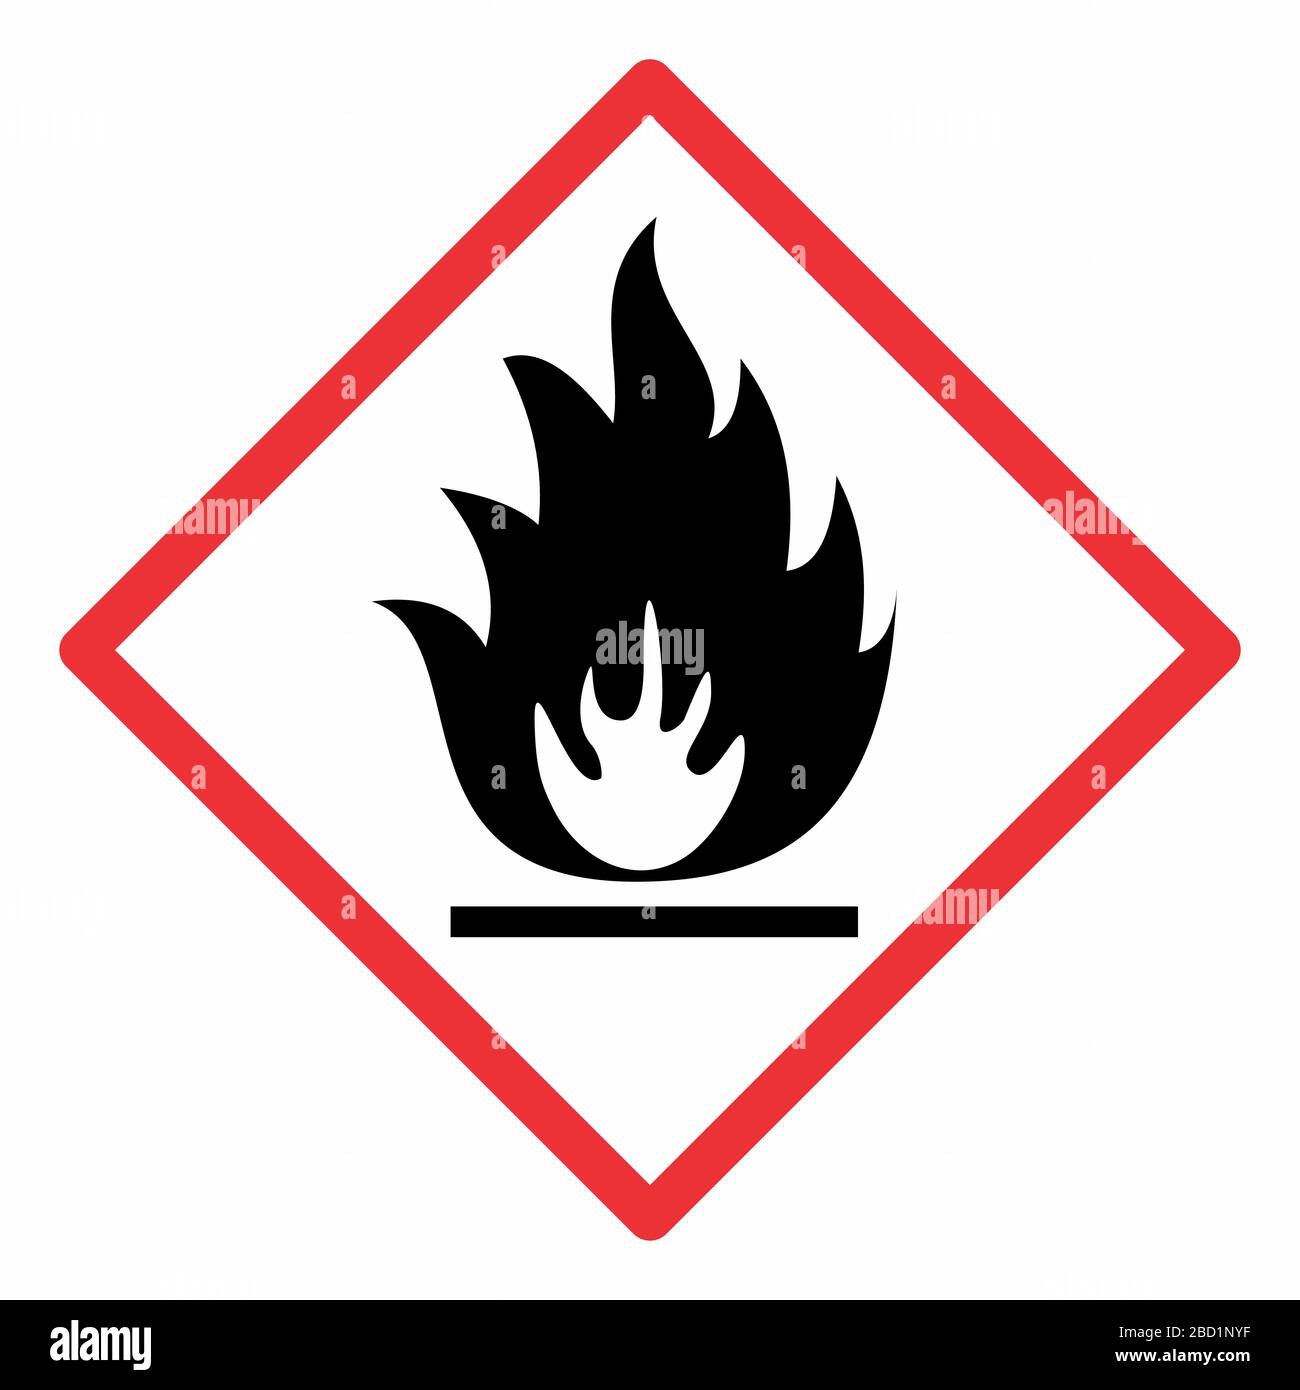 Flammable sign illustration Stock Vector